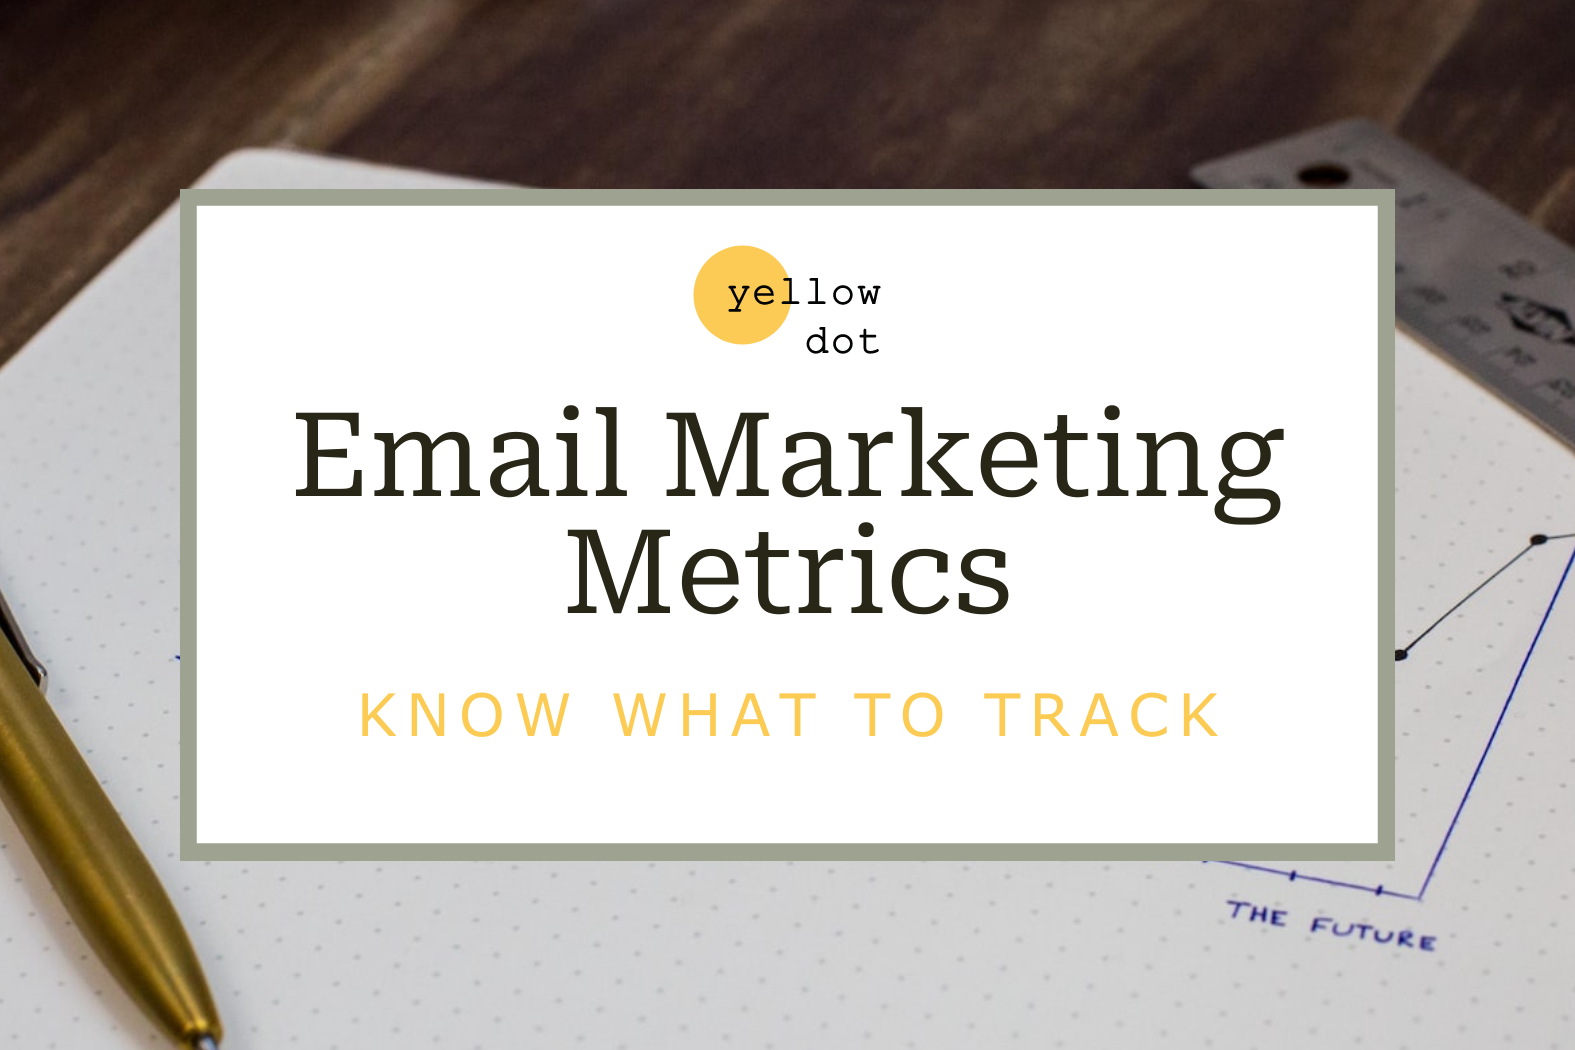 Email marketing metrics - know what to track for success